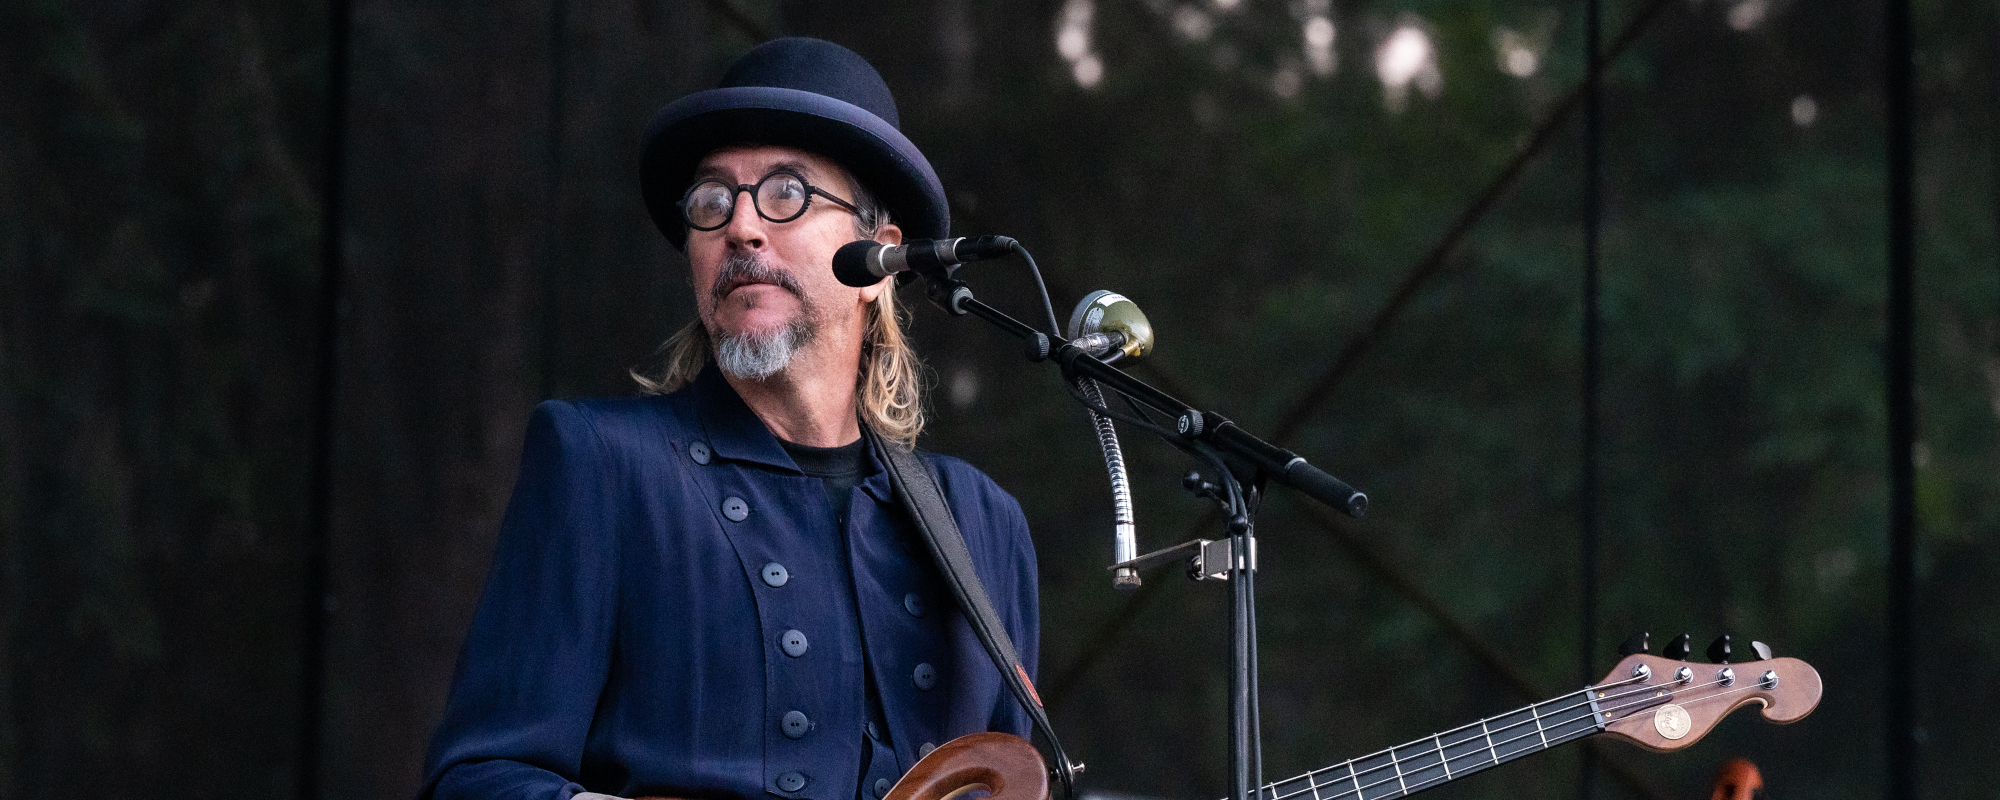 The Unconventional Path of Les Claypool: From Algebra Class to Iconic Bassist